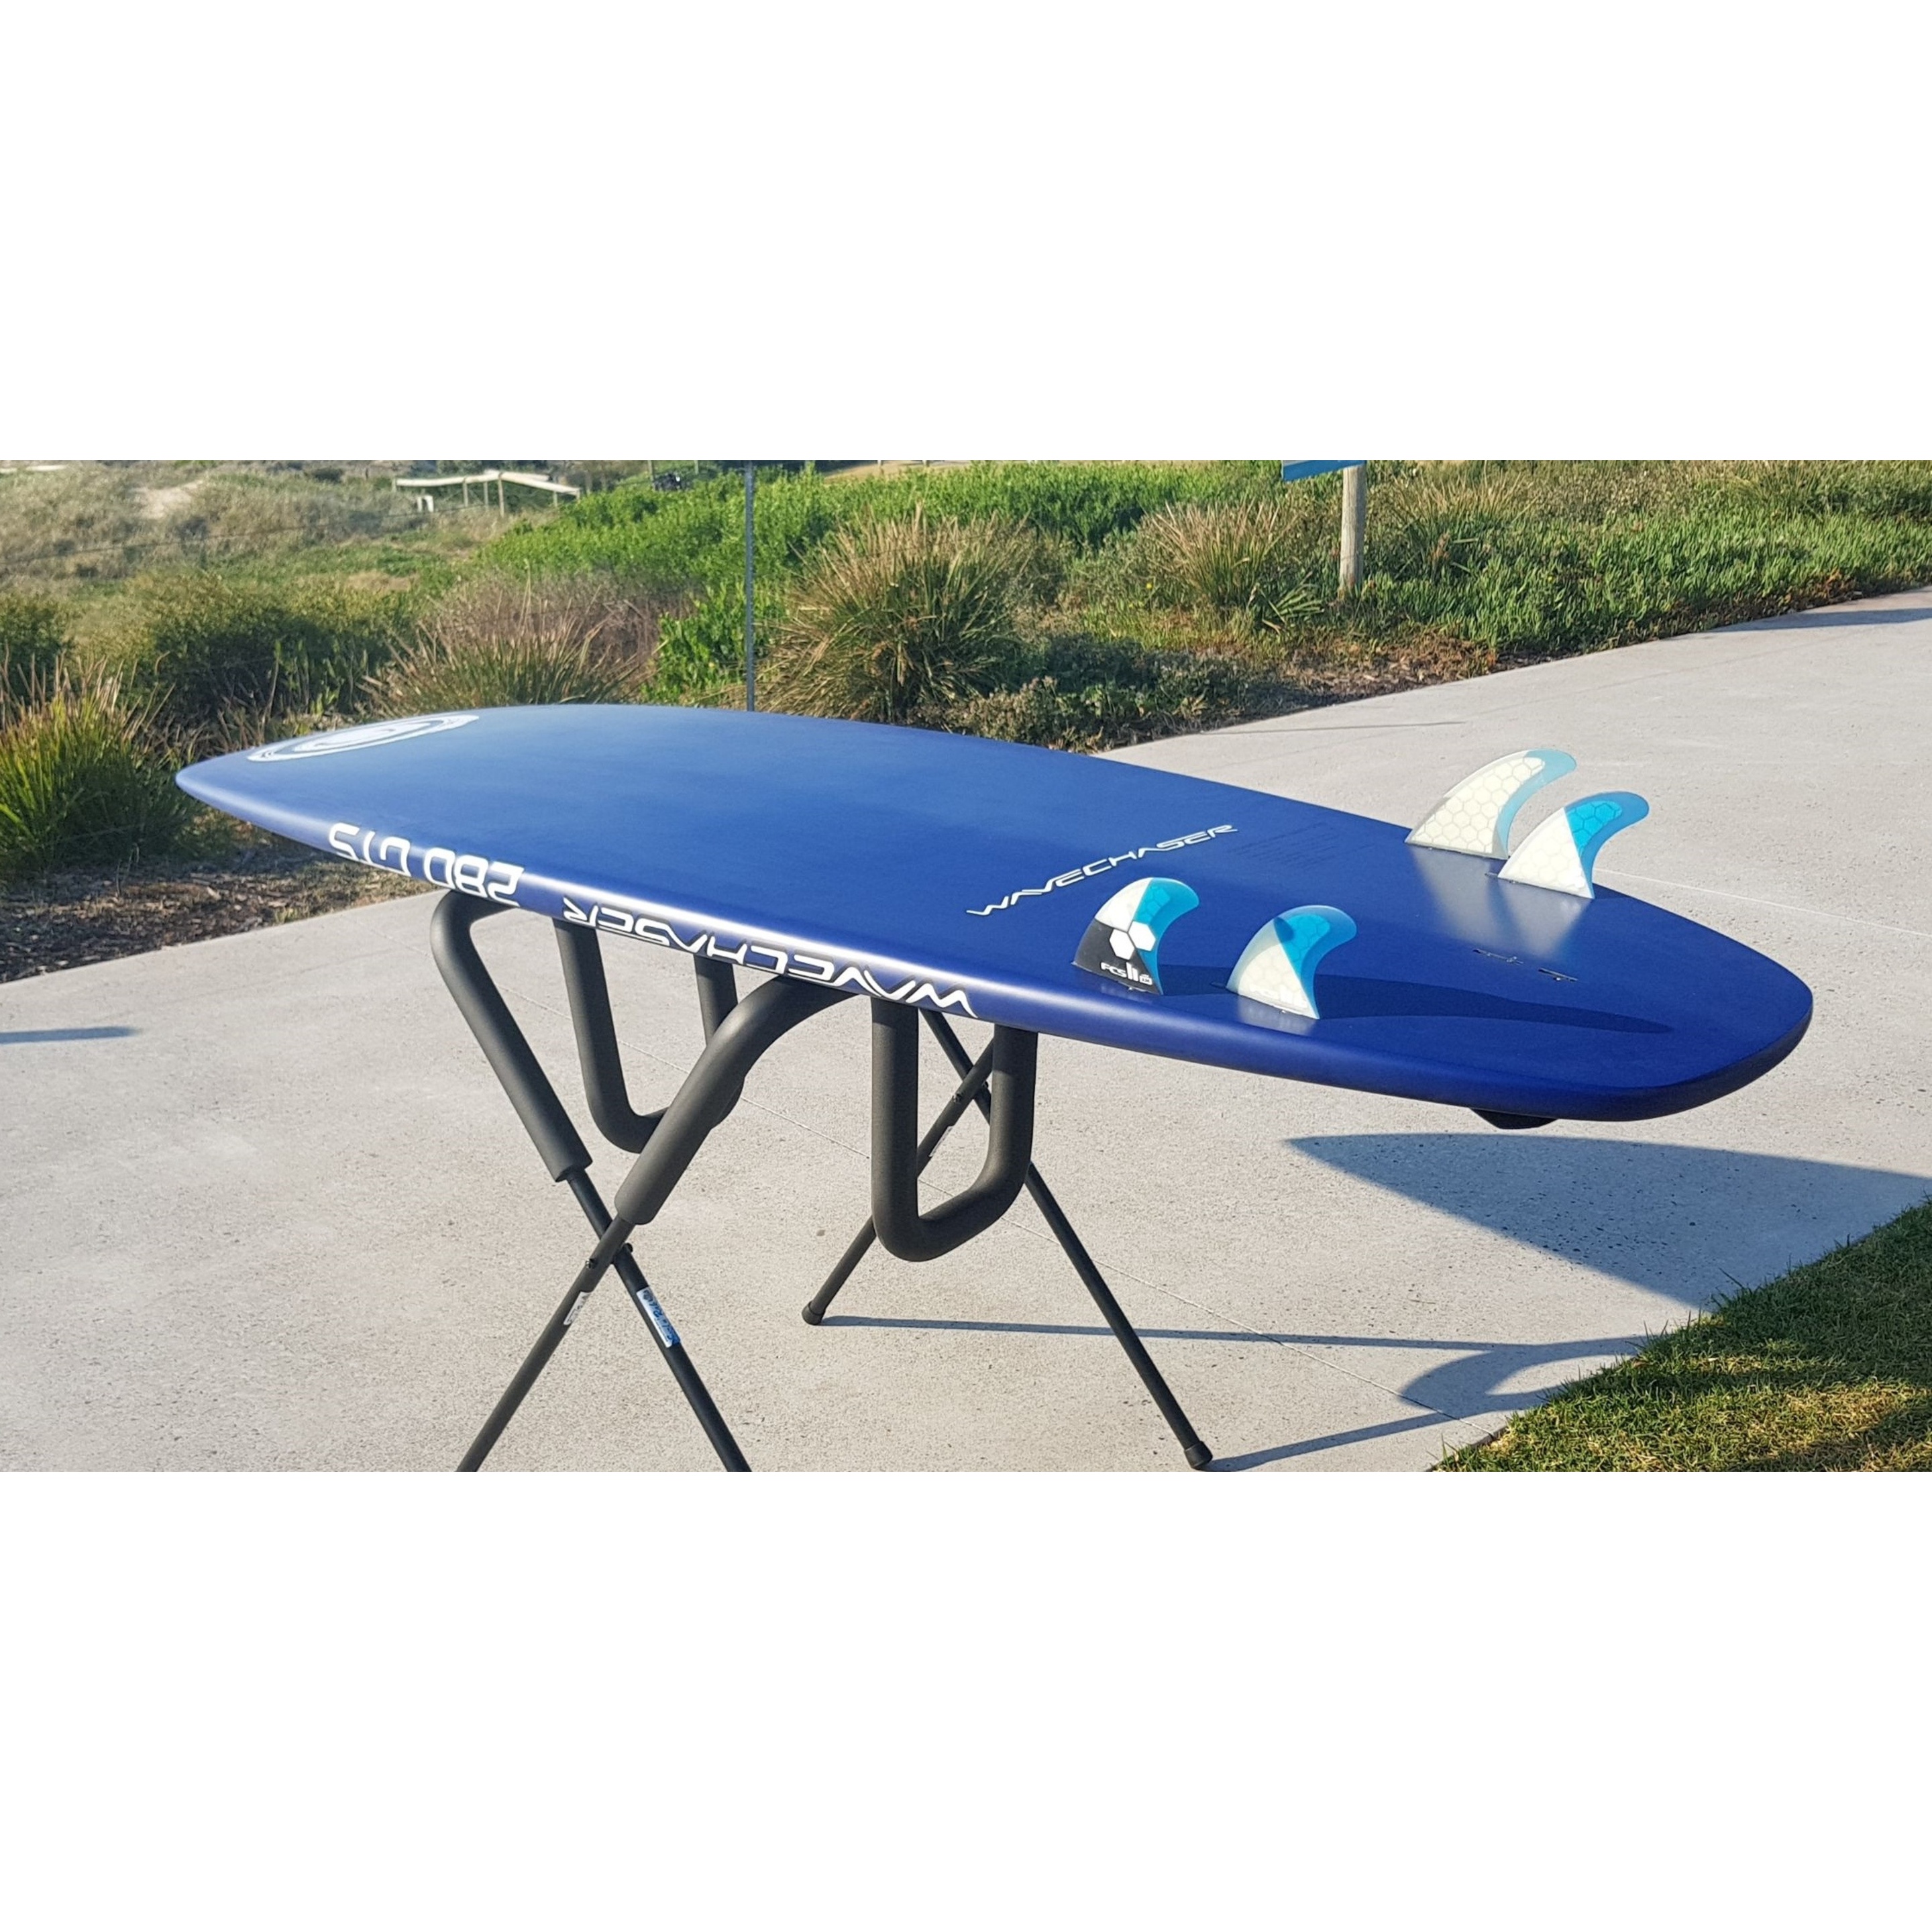 Tabla Sup/ Surf Carbon Wave Chaser 280 Gts